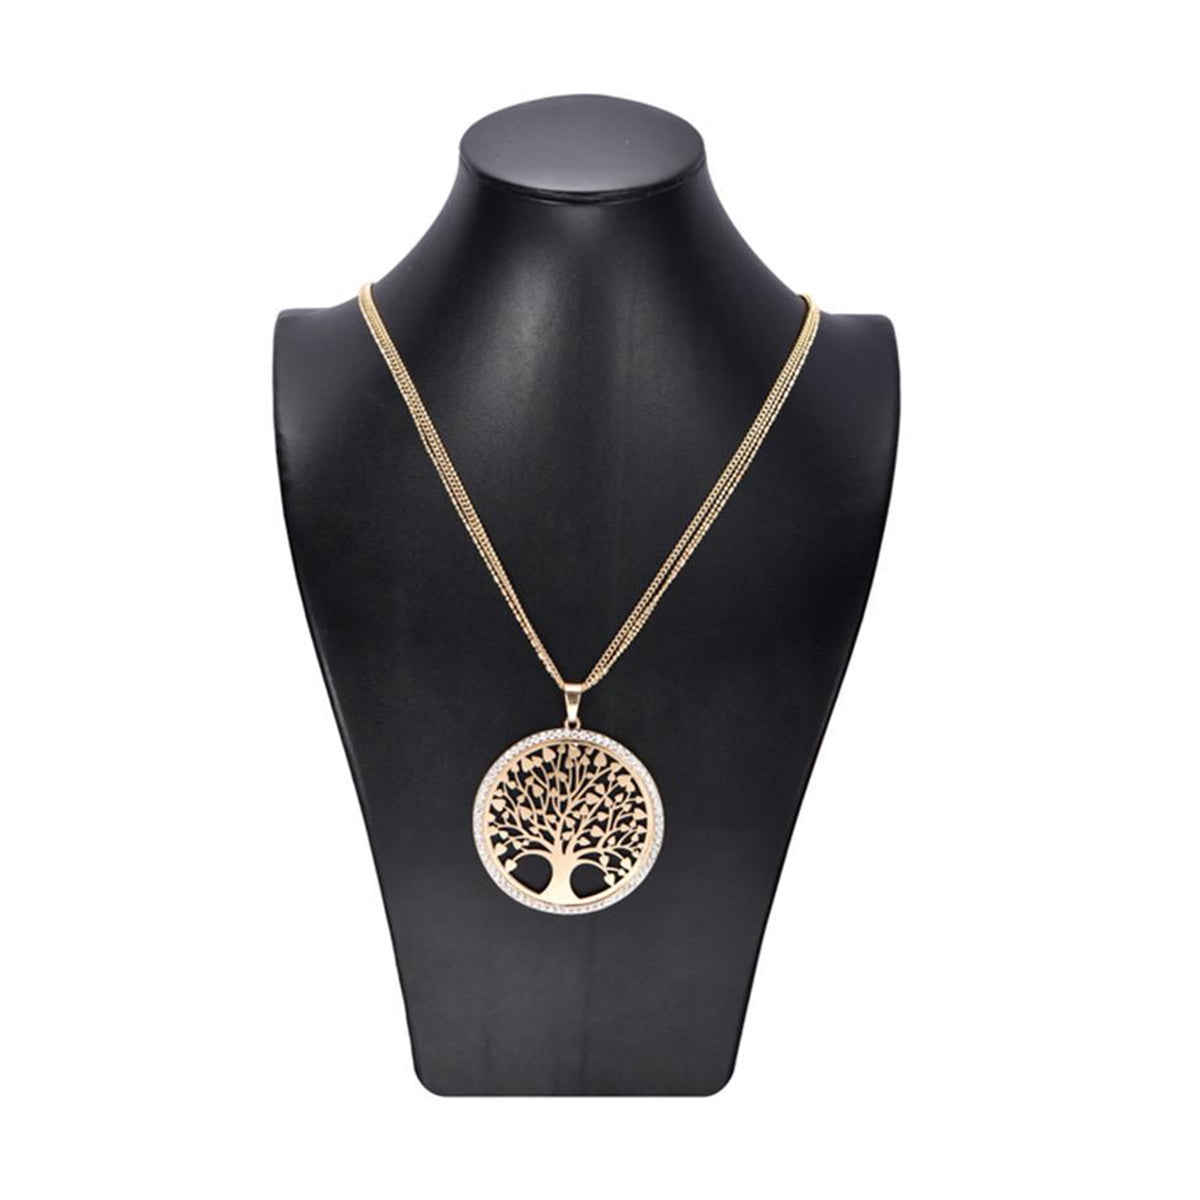 3 Sets of Tree of Life - Pendant Necklace With Rhinestones